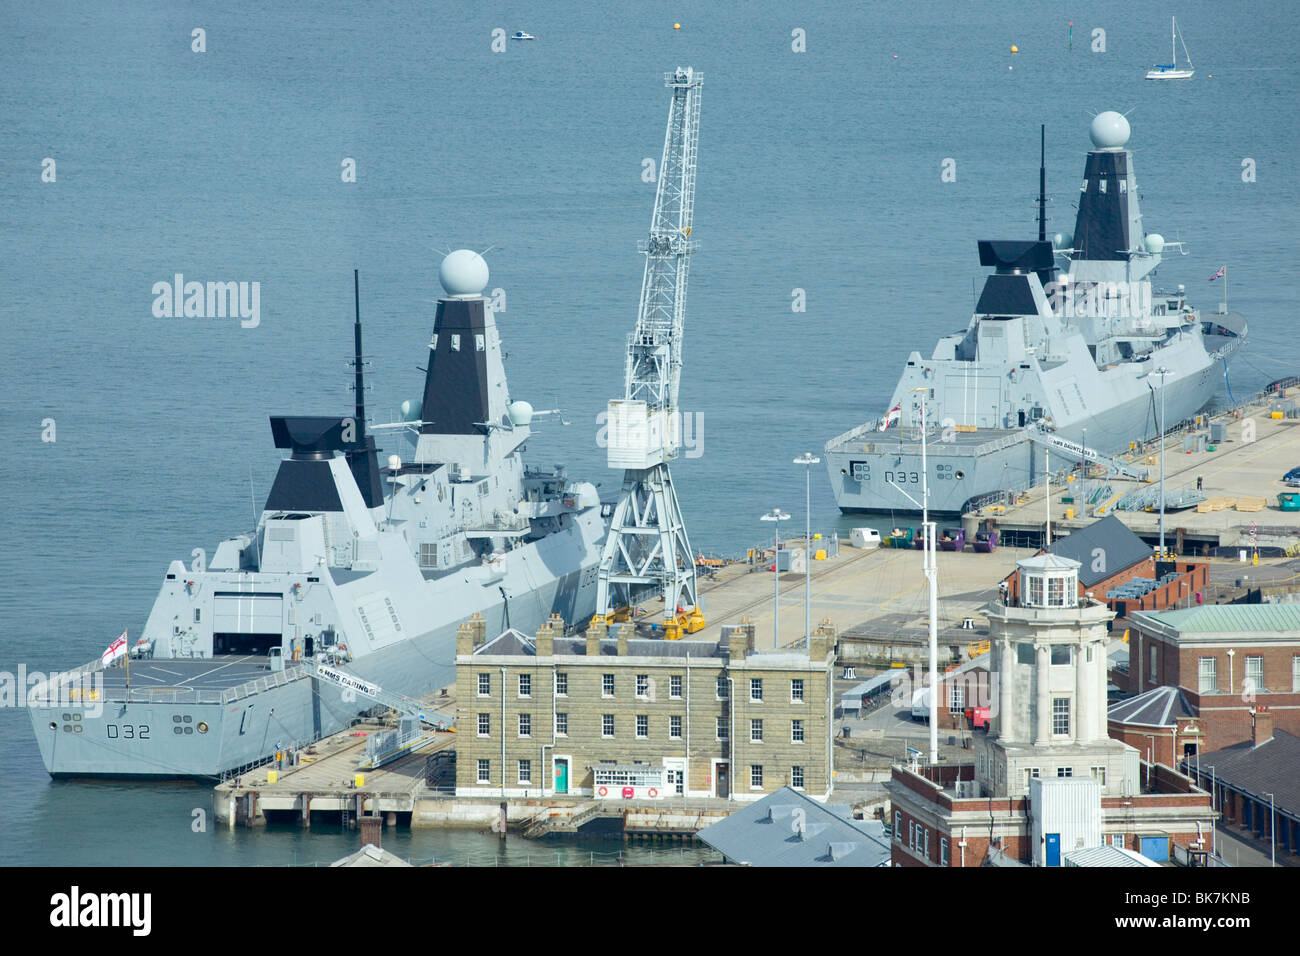 HMS Daring (left) and HMS Dauntless (right) in dock at Portsmouth harbour Stock Photo